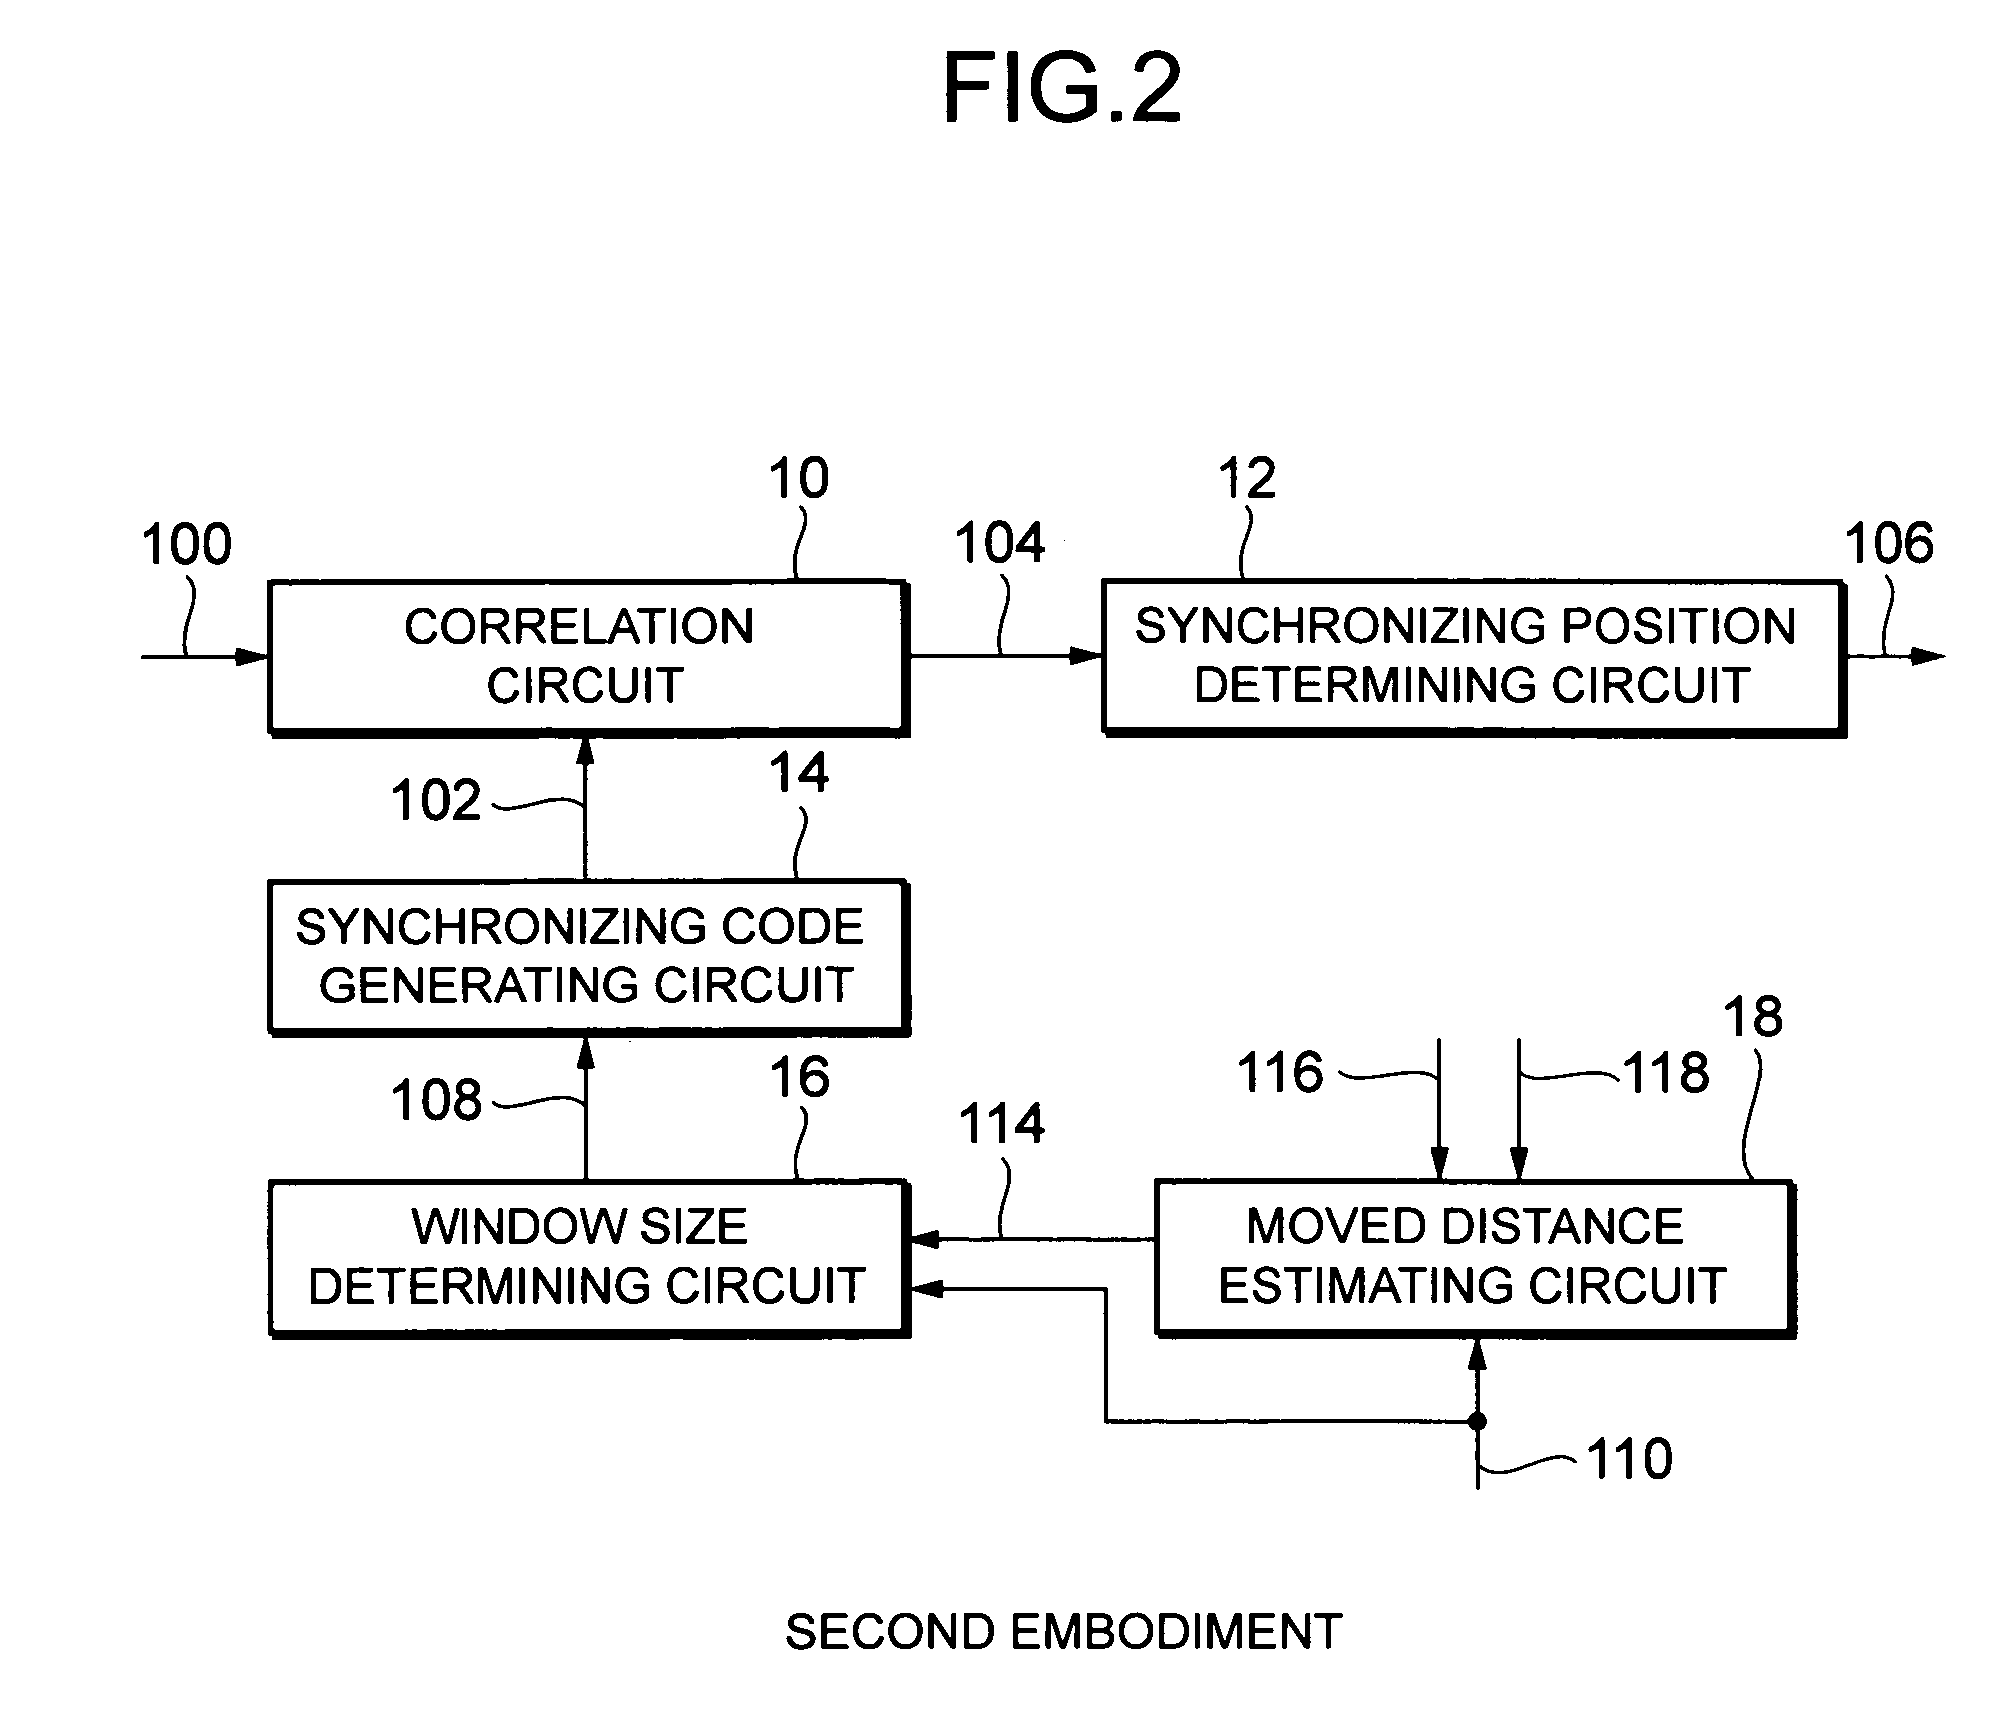 Synchronizing position detecting circuit